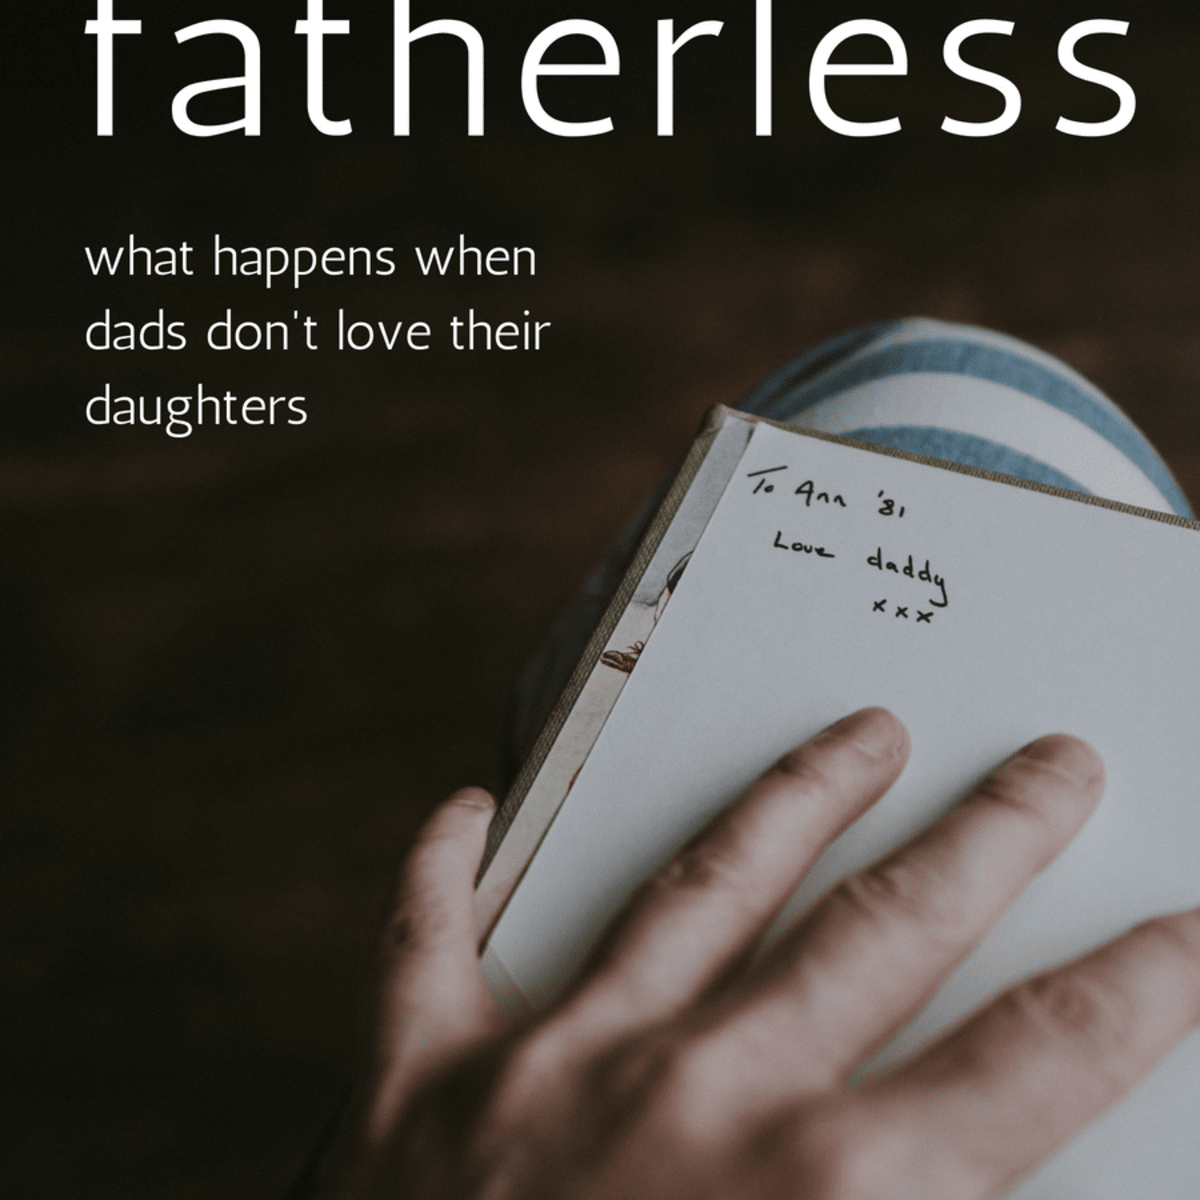 Porn Girls Love Dad - Fatherless Daughters: How Growing Up Without a Dad Affects Women -  WeHaveKids